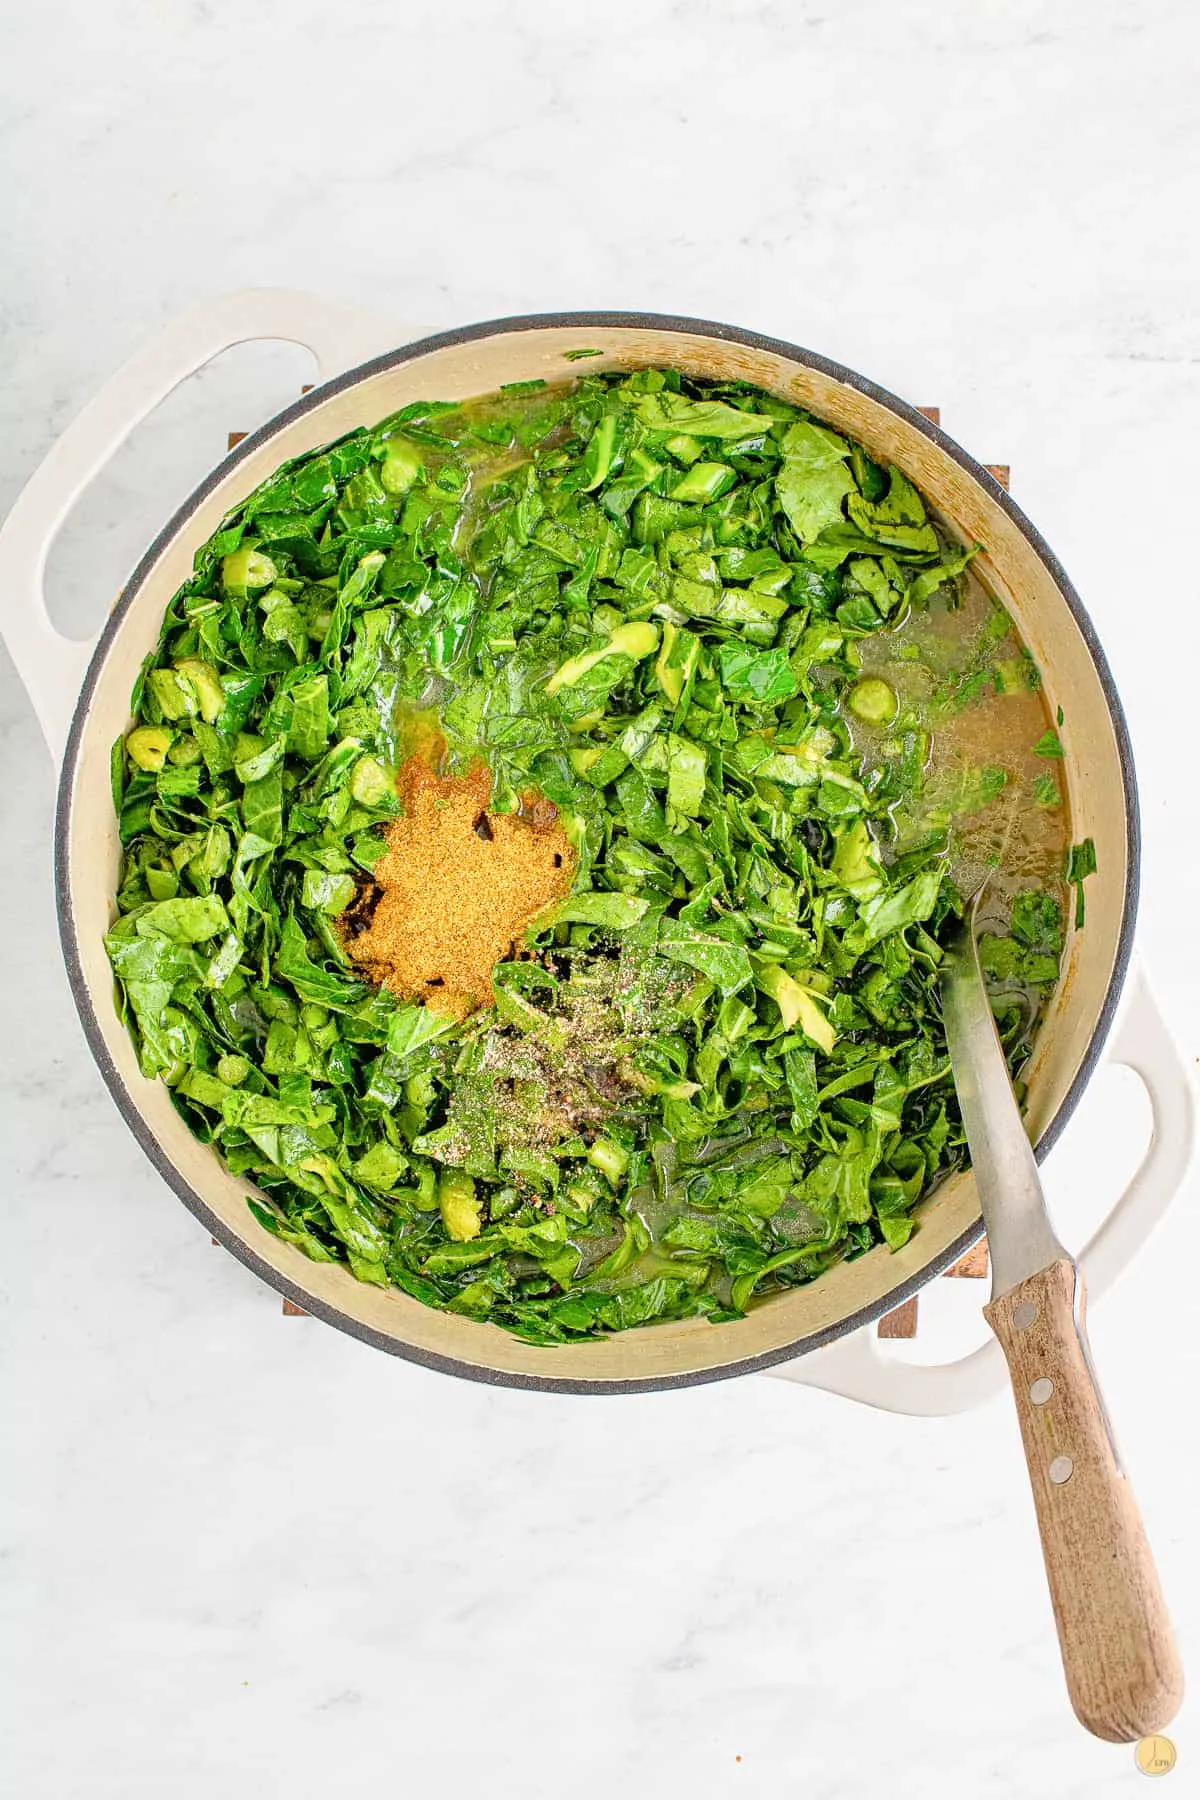 uncooked greens in a pot